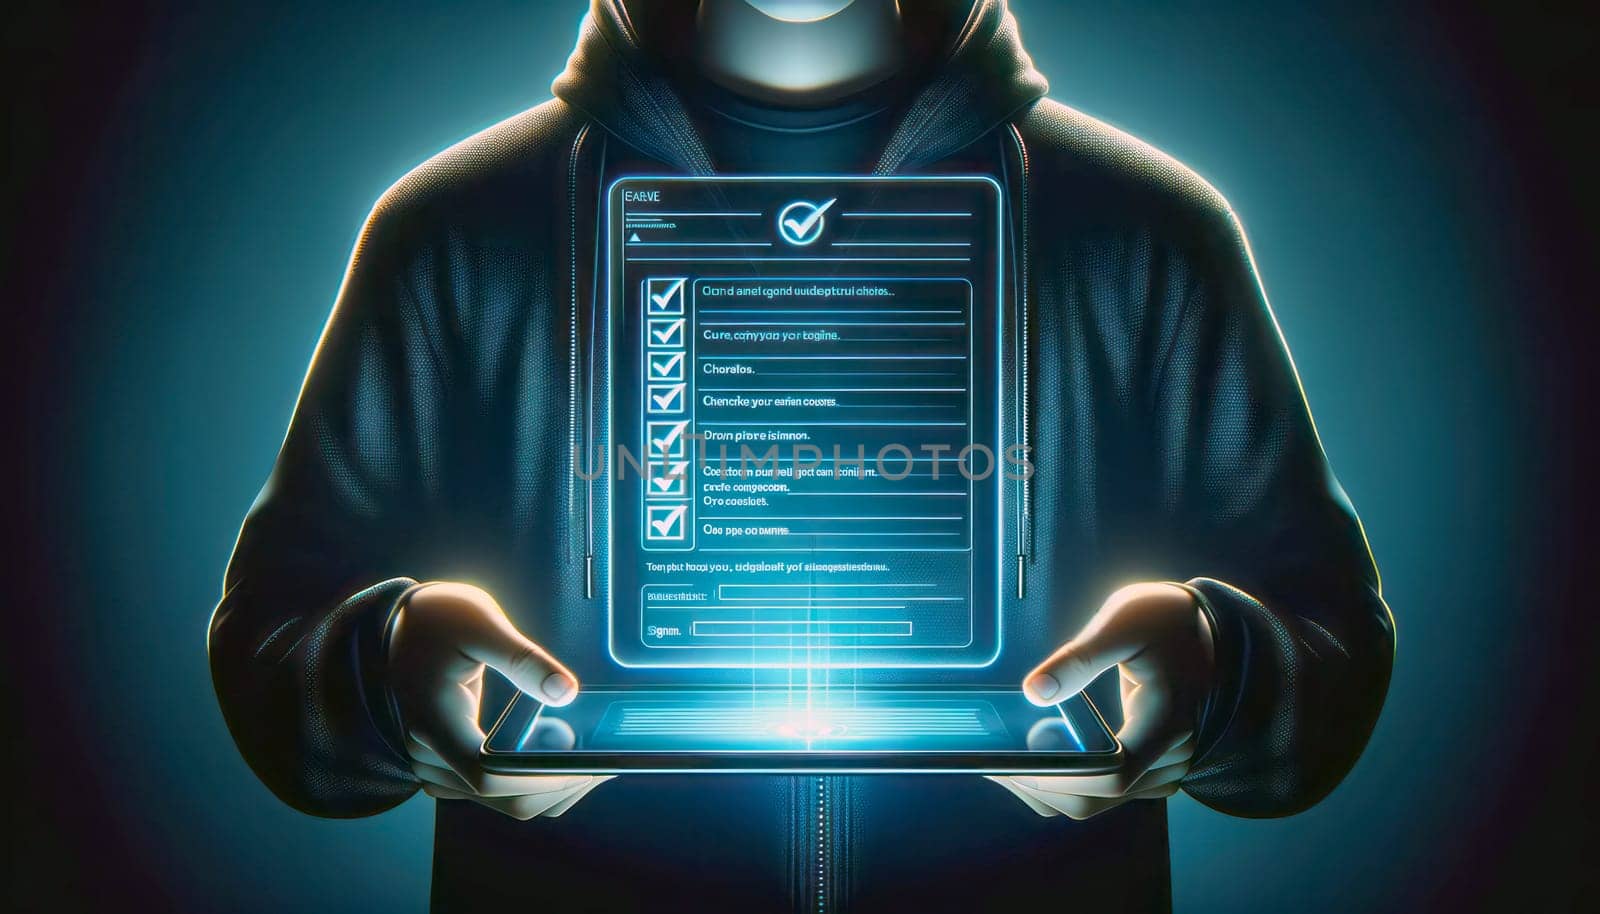 A digital illustration of a person in a dark outfit holding a tablet with a screen displaying a checklist interface. The screen shows three checked checkboxes on the left and lines for text on the right, with a line at the bottom labeled 'Signature'. The tablet is the main focus, with a glowing blue interface that stands out against the dark background. The person's hands are visible holding the tablet, but their face is not in the frame, emphasizing the electronic document on the display.